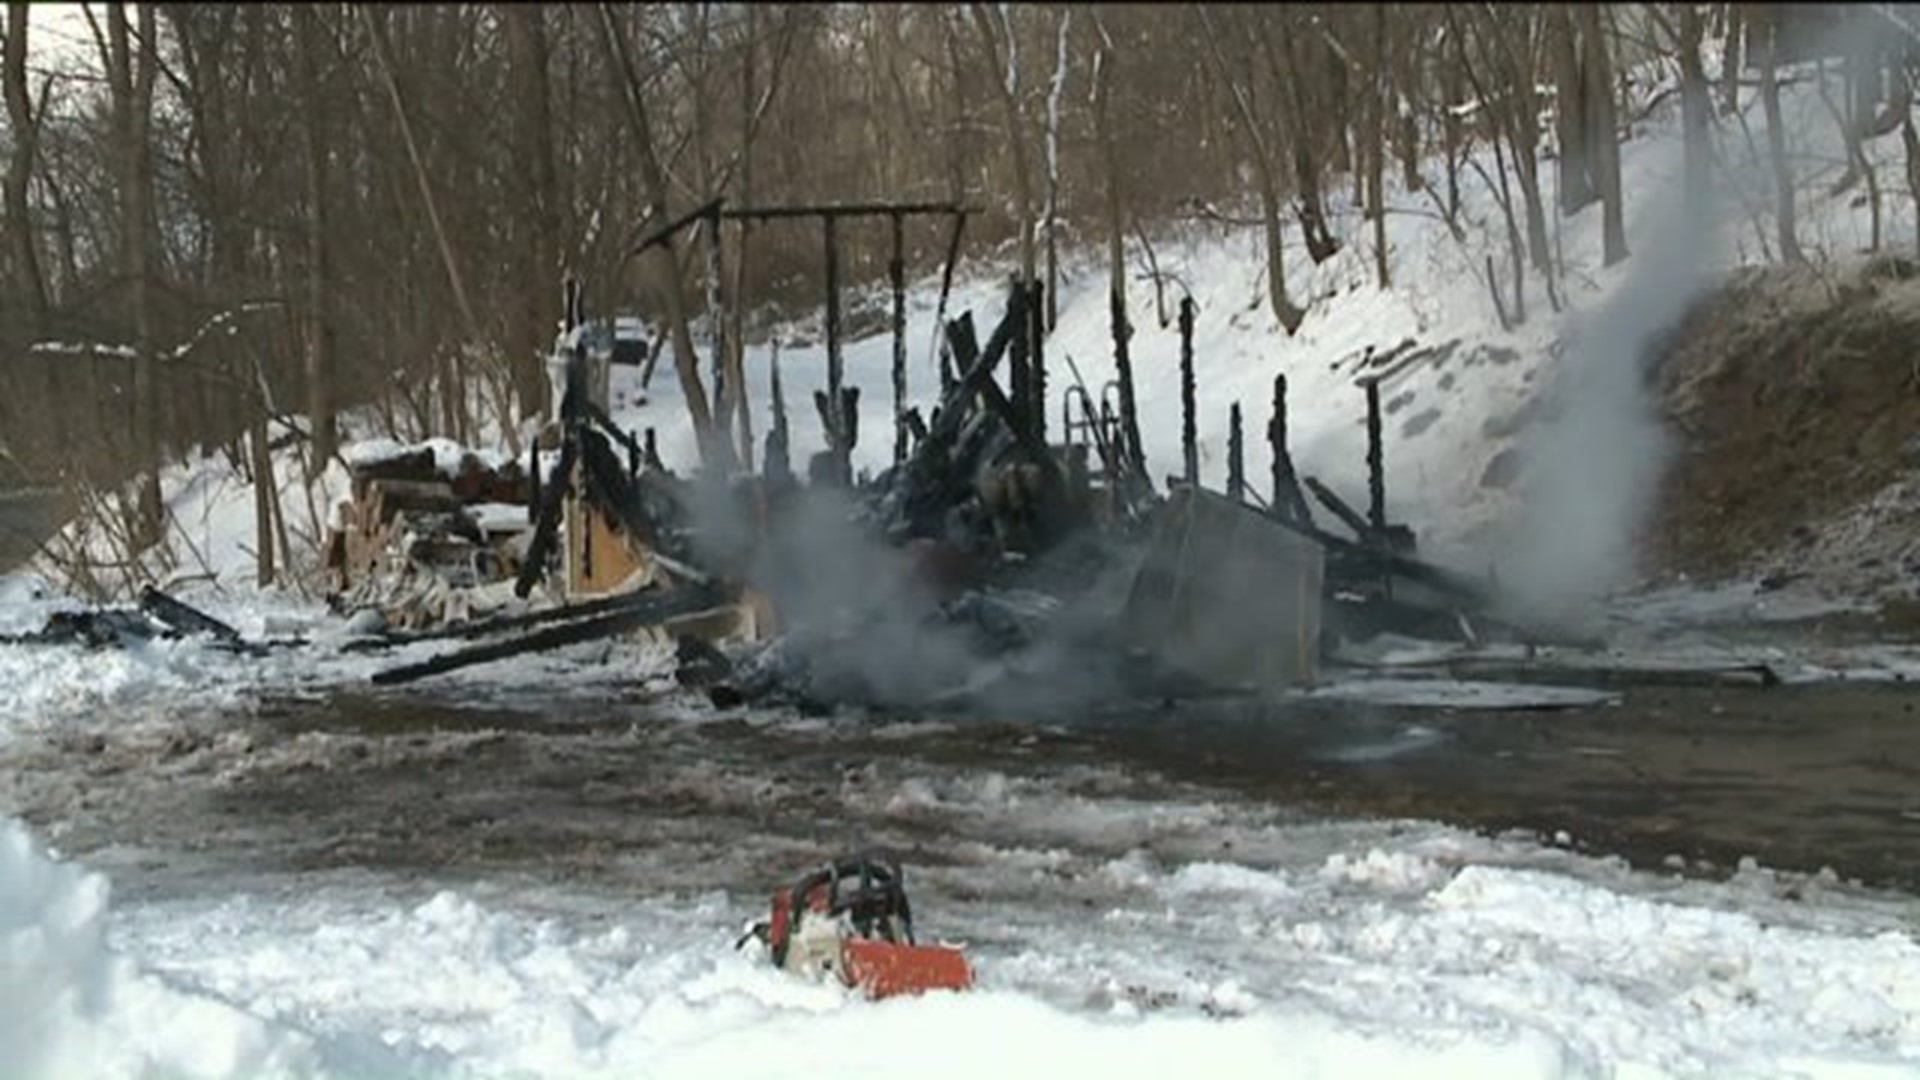 Trailer Destroyed by Fire in Wyoming County